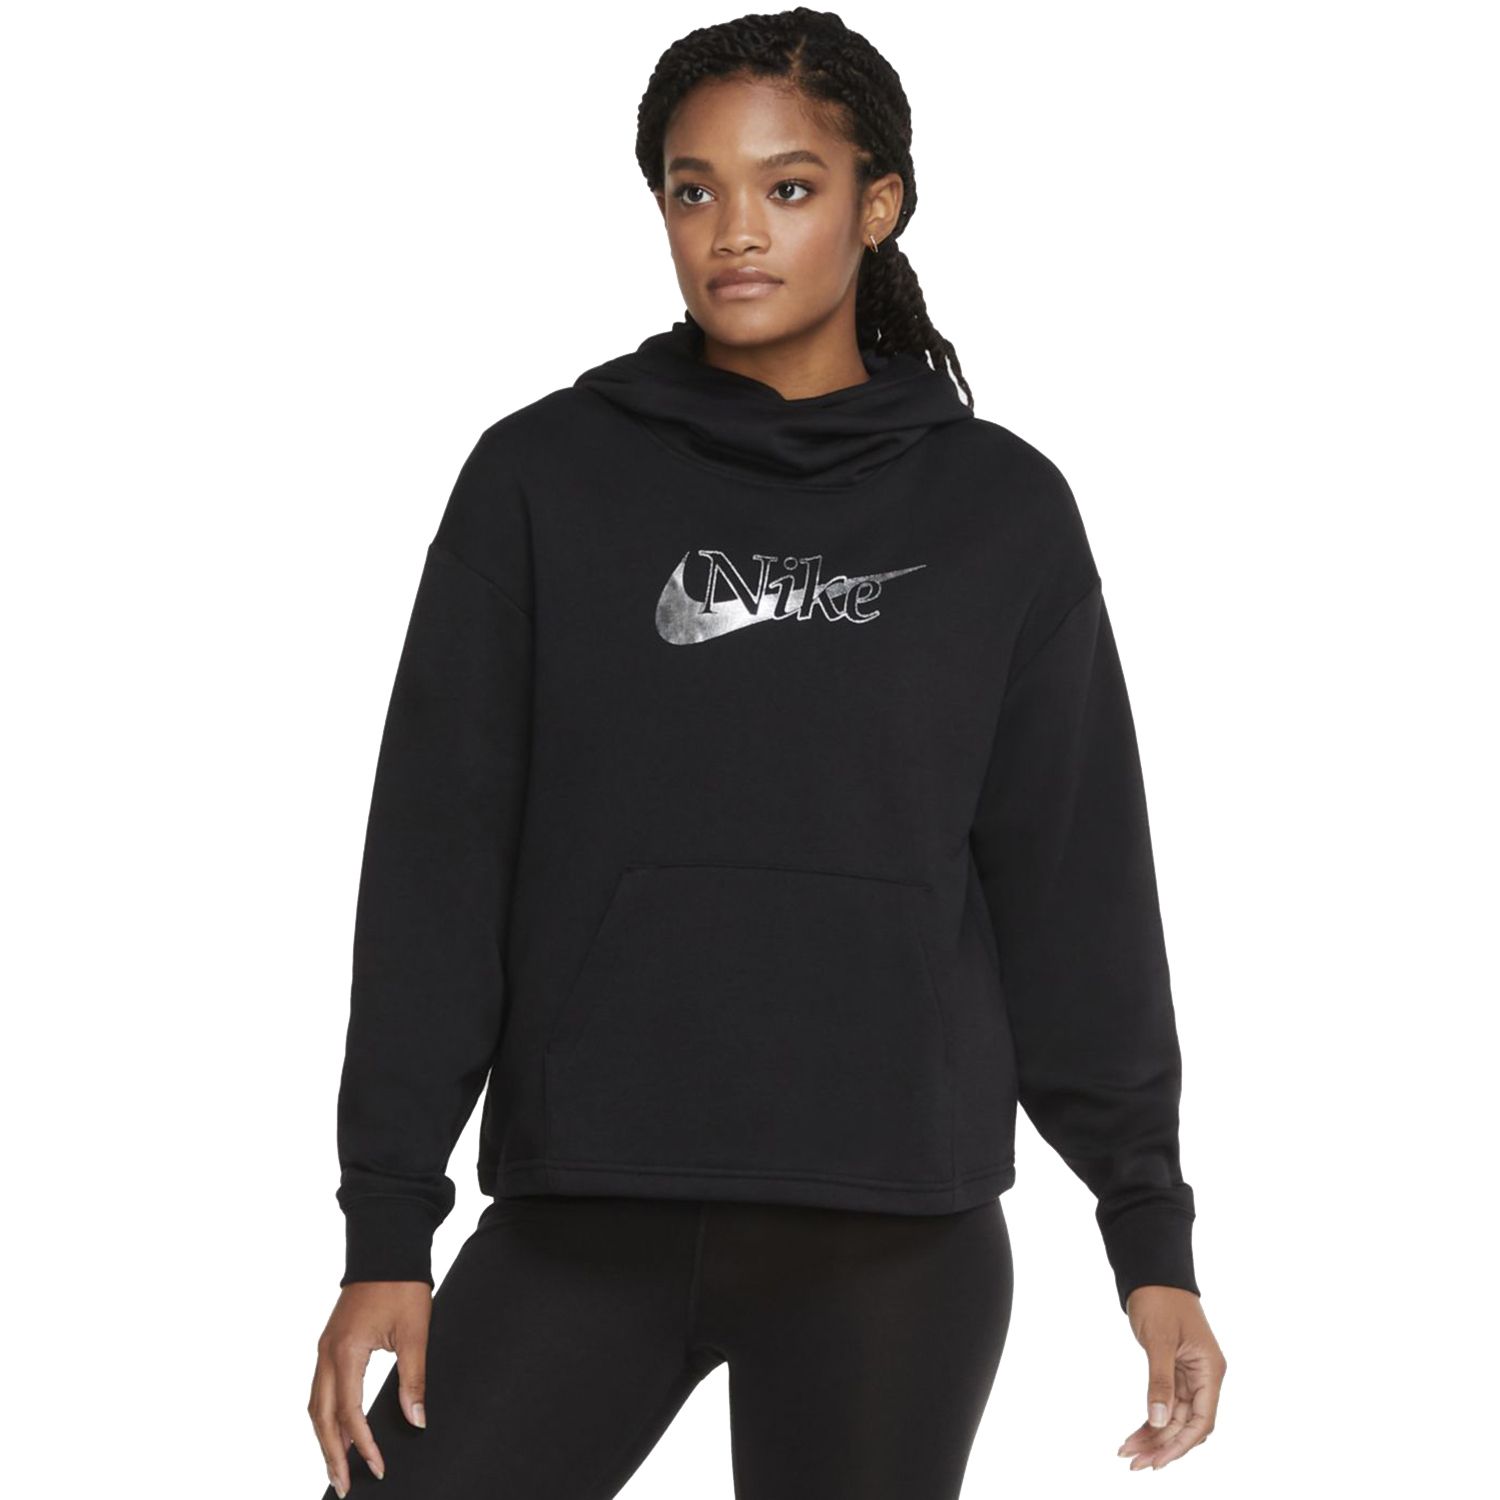 nike hoodie that covers face